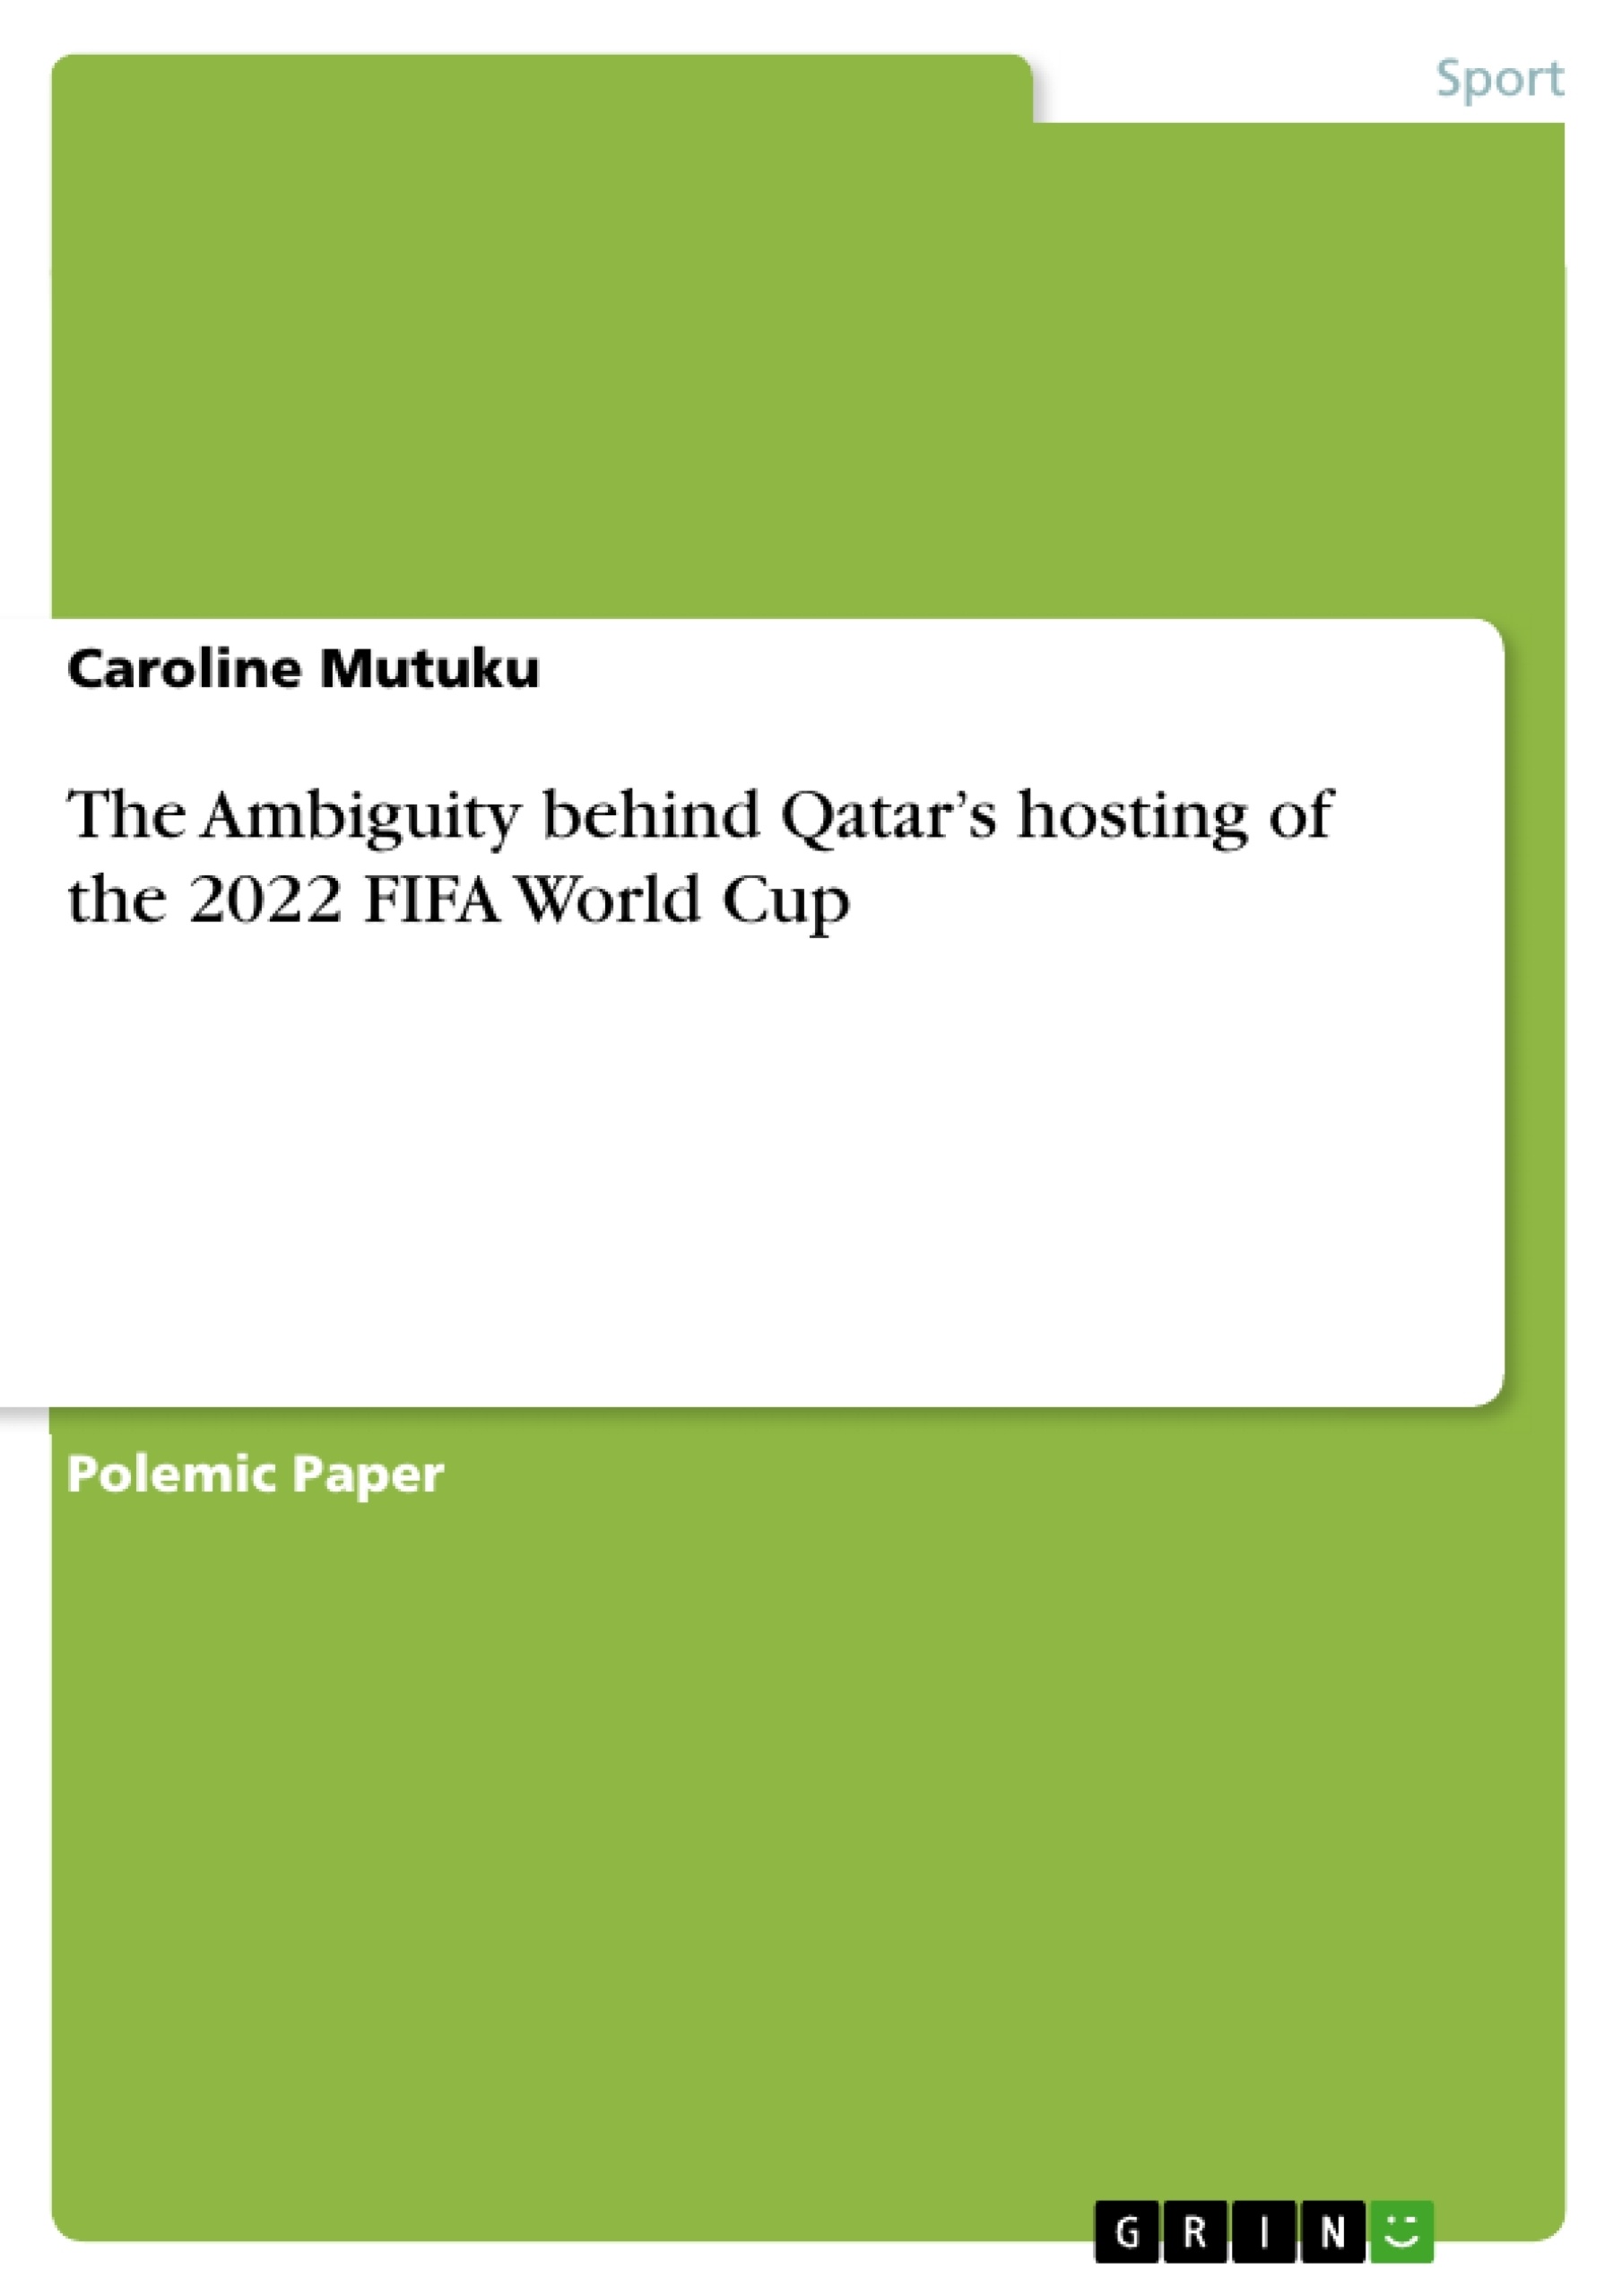 Título: The Ambiguity behind Qatar’s hosting of the 2022 FIFA World Cup